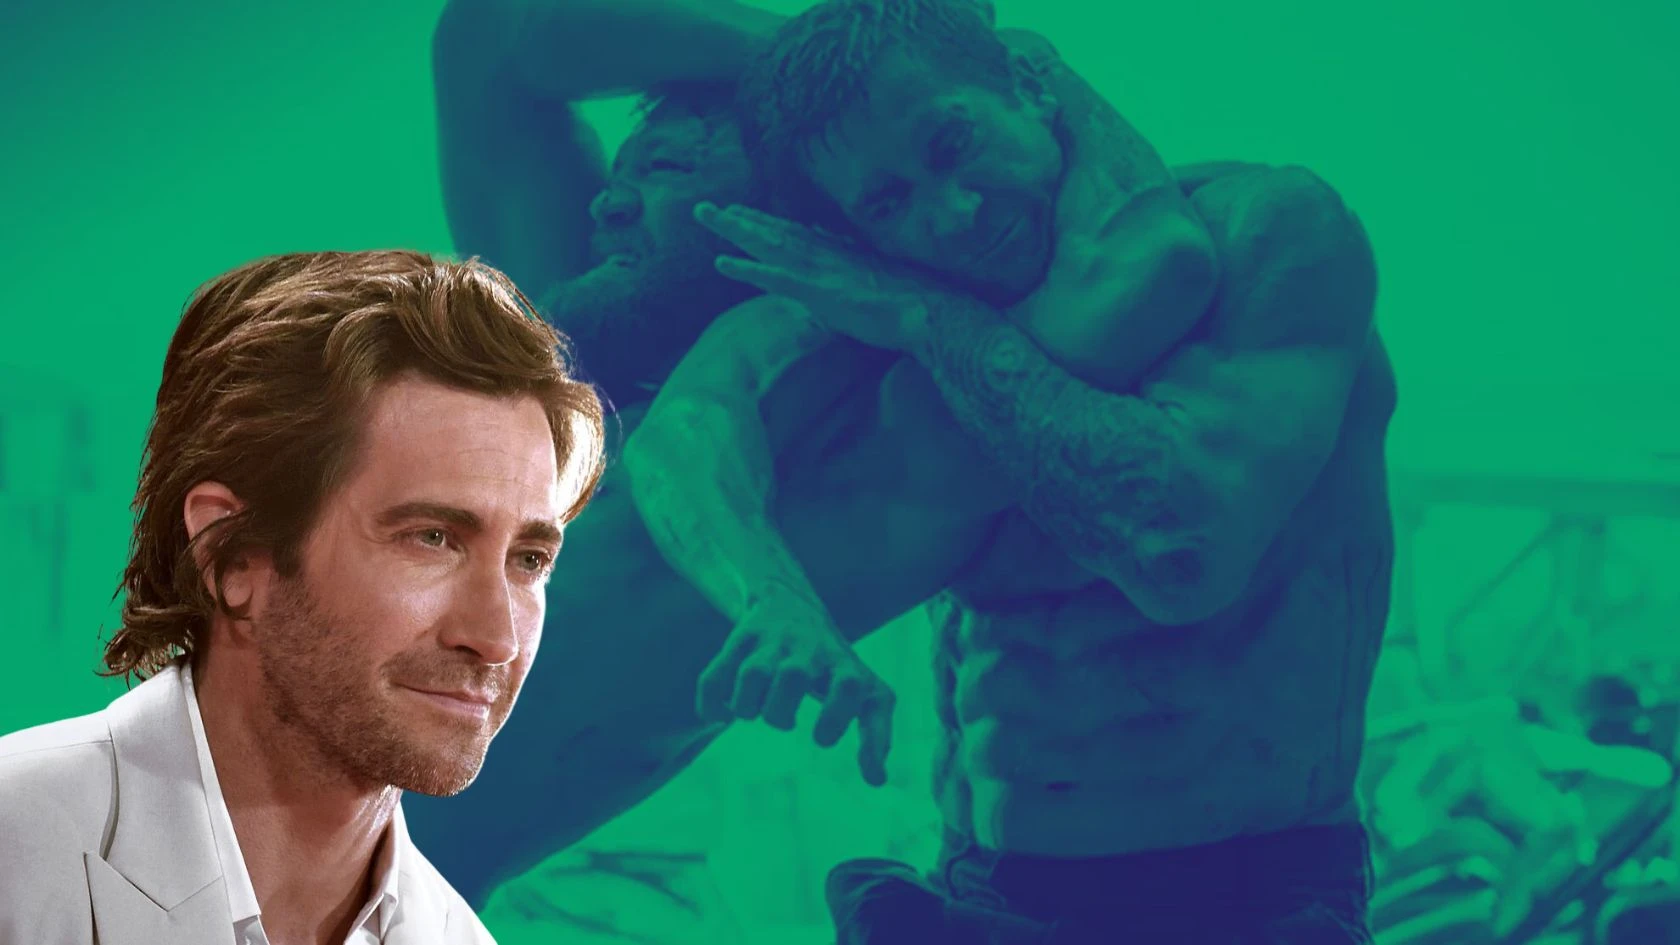 Challenges with Real-Life Fighter Jake Gyllenhaal recalls filming 'Road House'